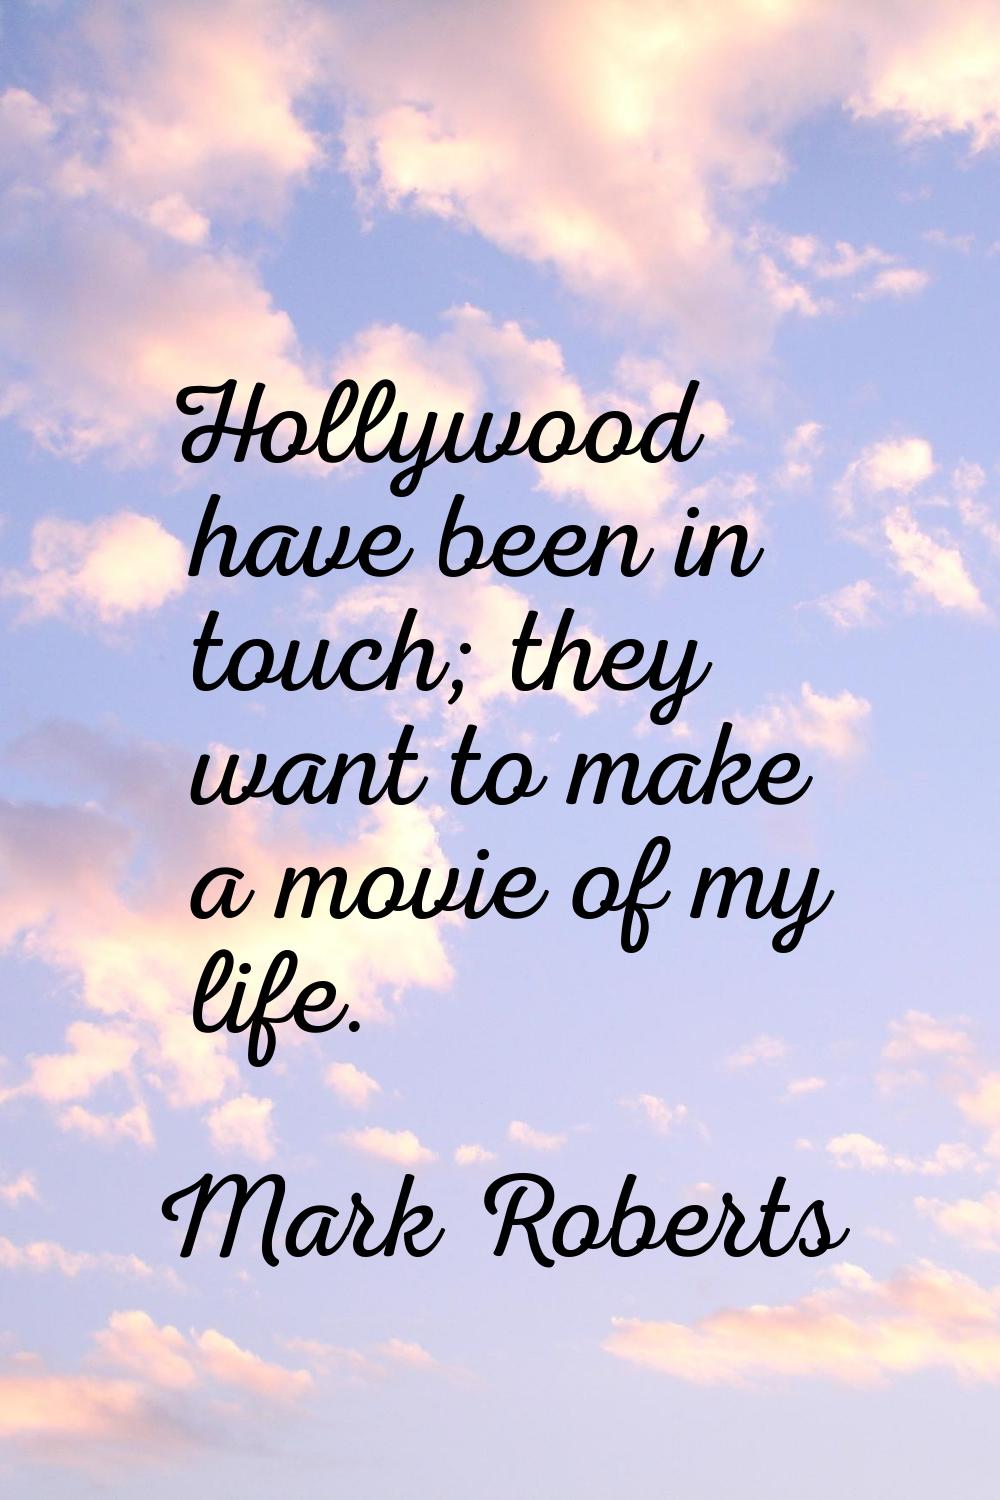 Hollywood have been in touch; they want to make a movie of my life.